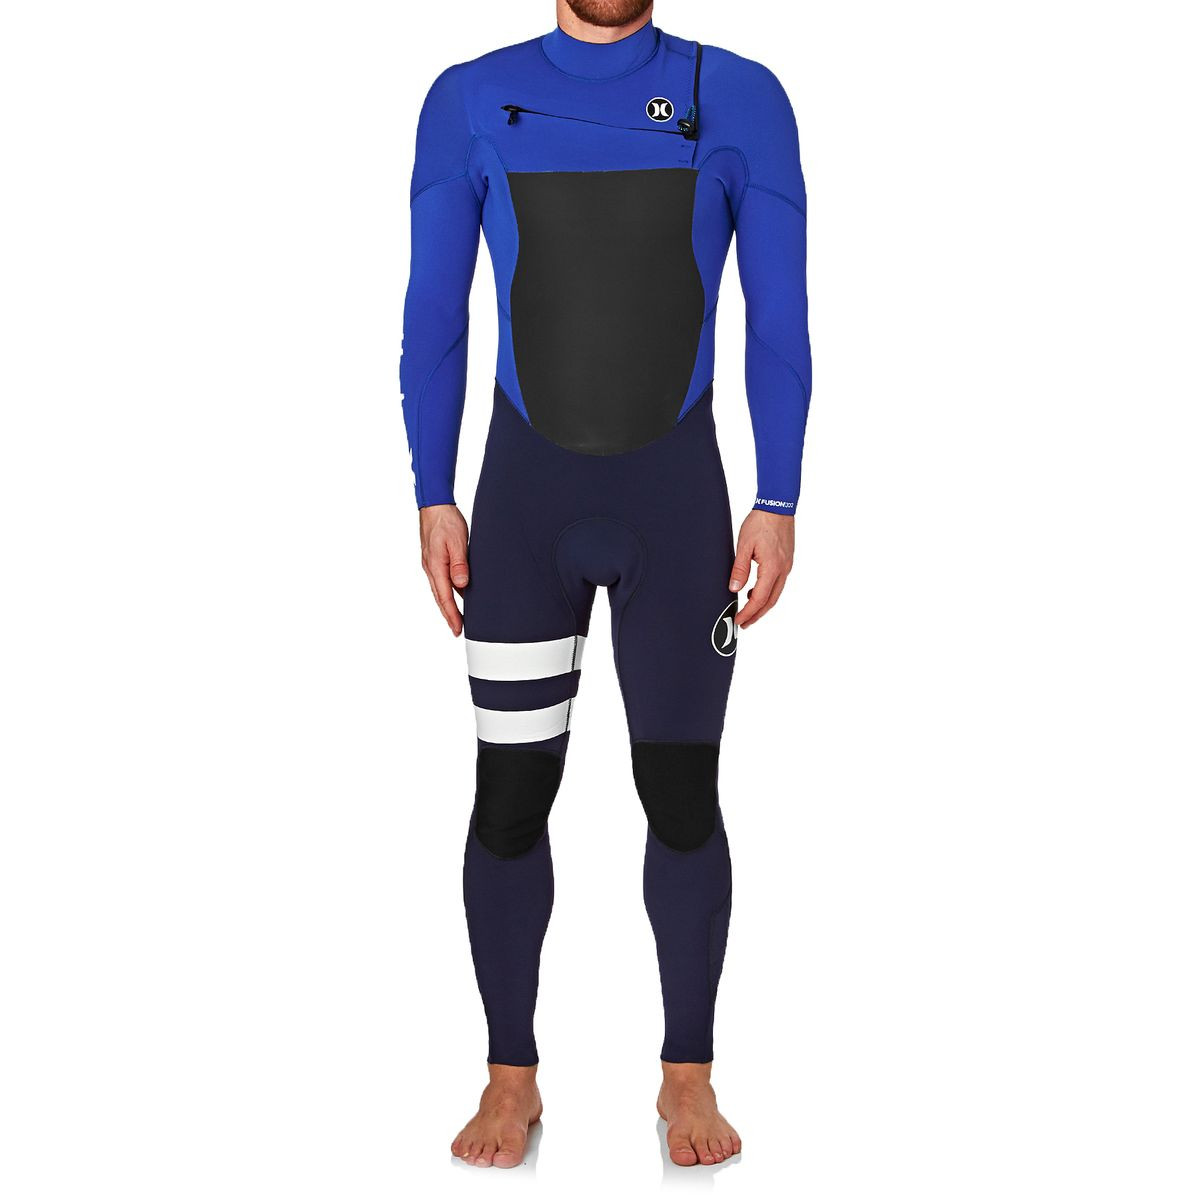 Hurley Fusion 3/2mm 2017 Chest Zip Wetsuit - Racer Blue